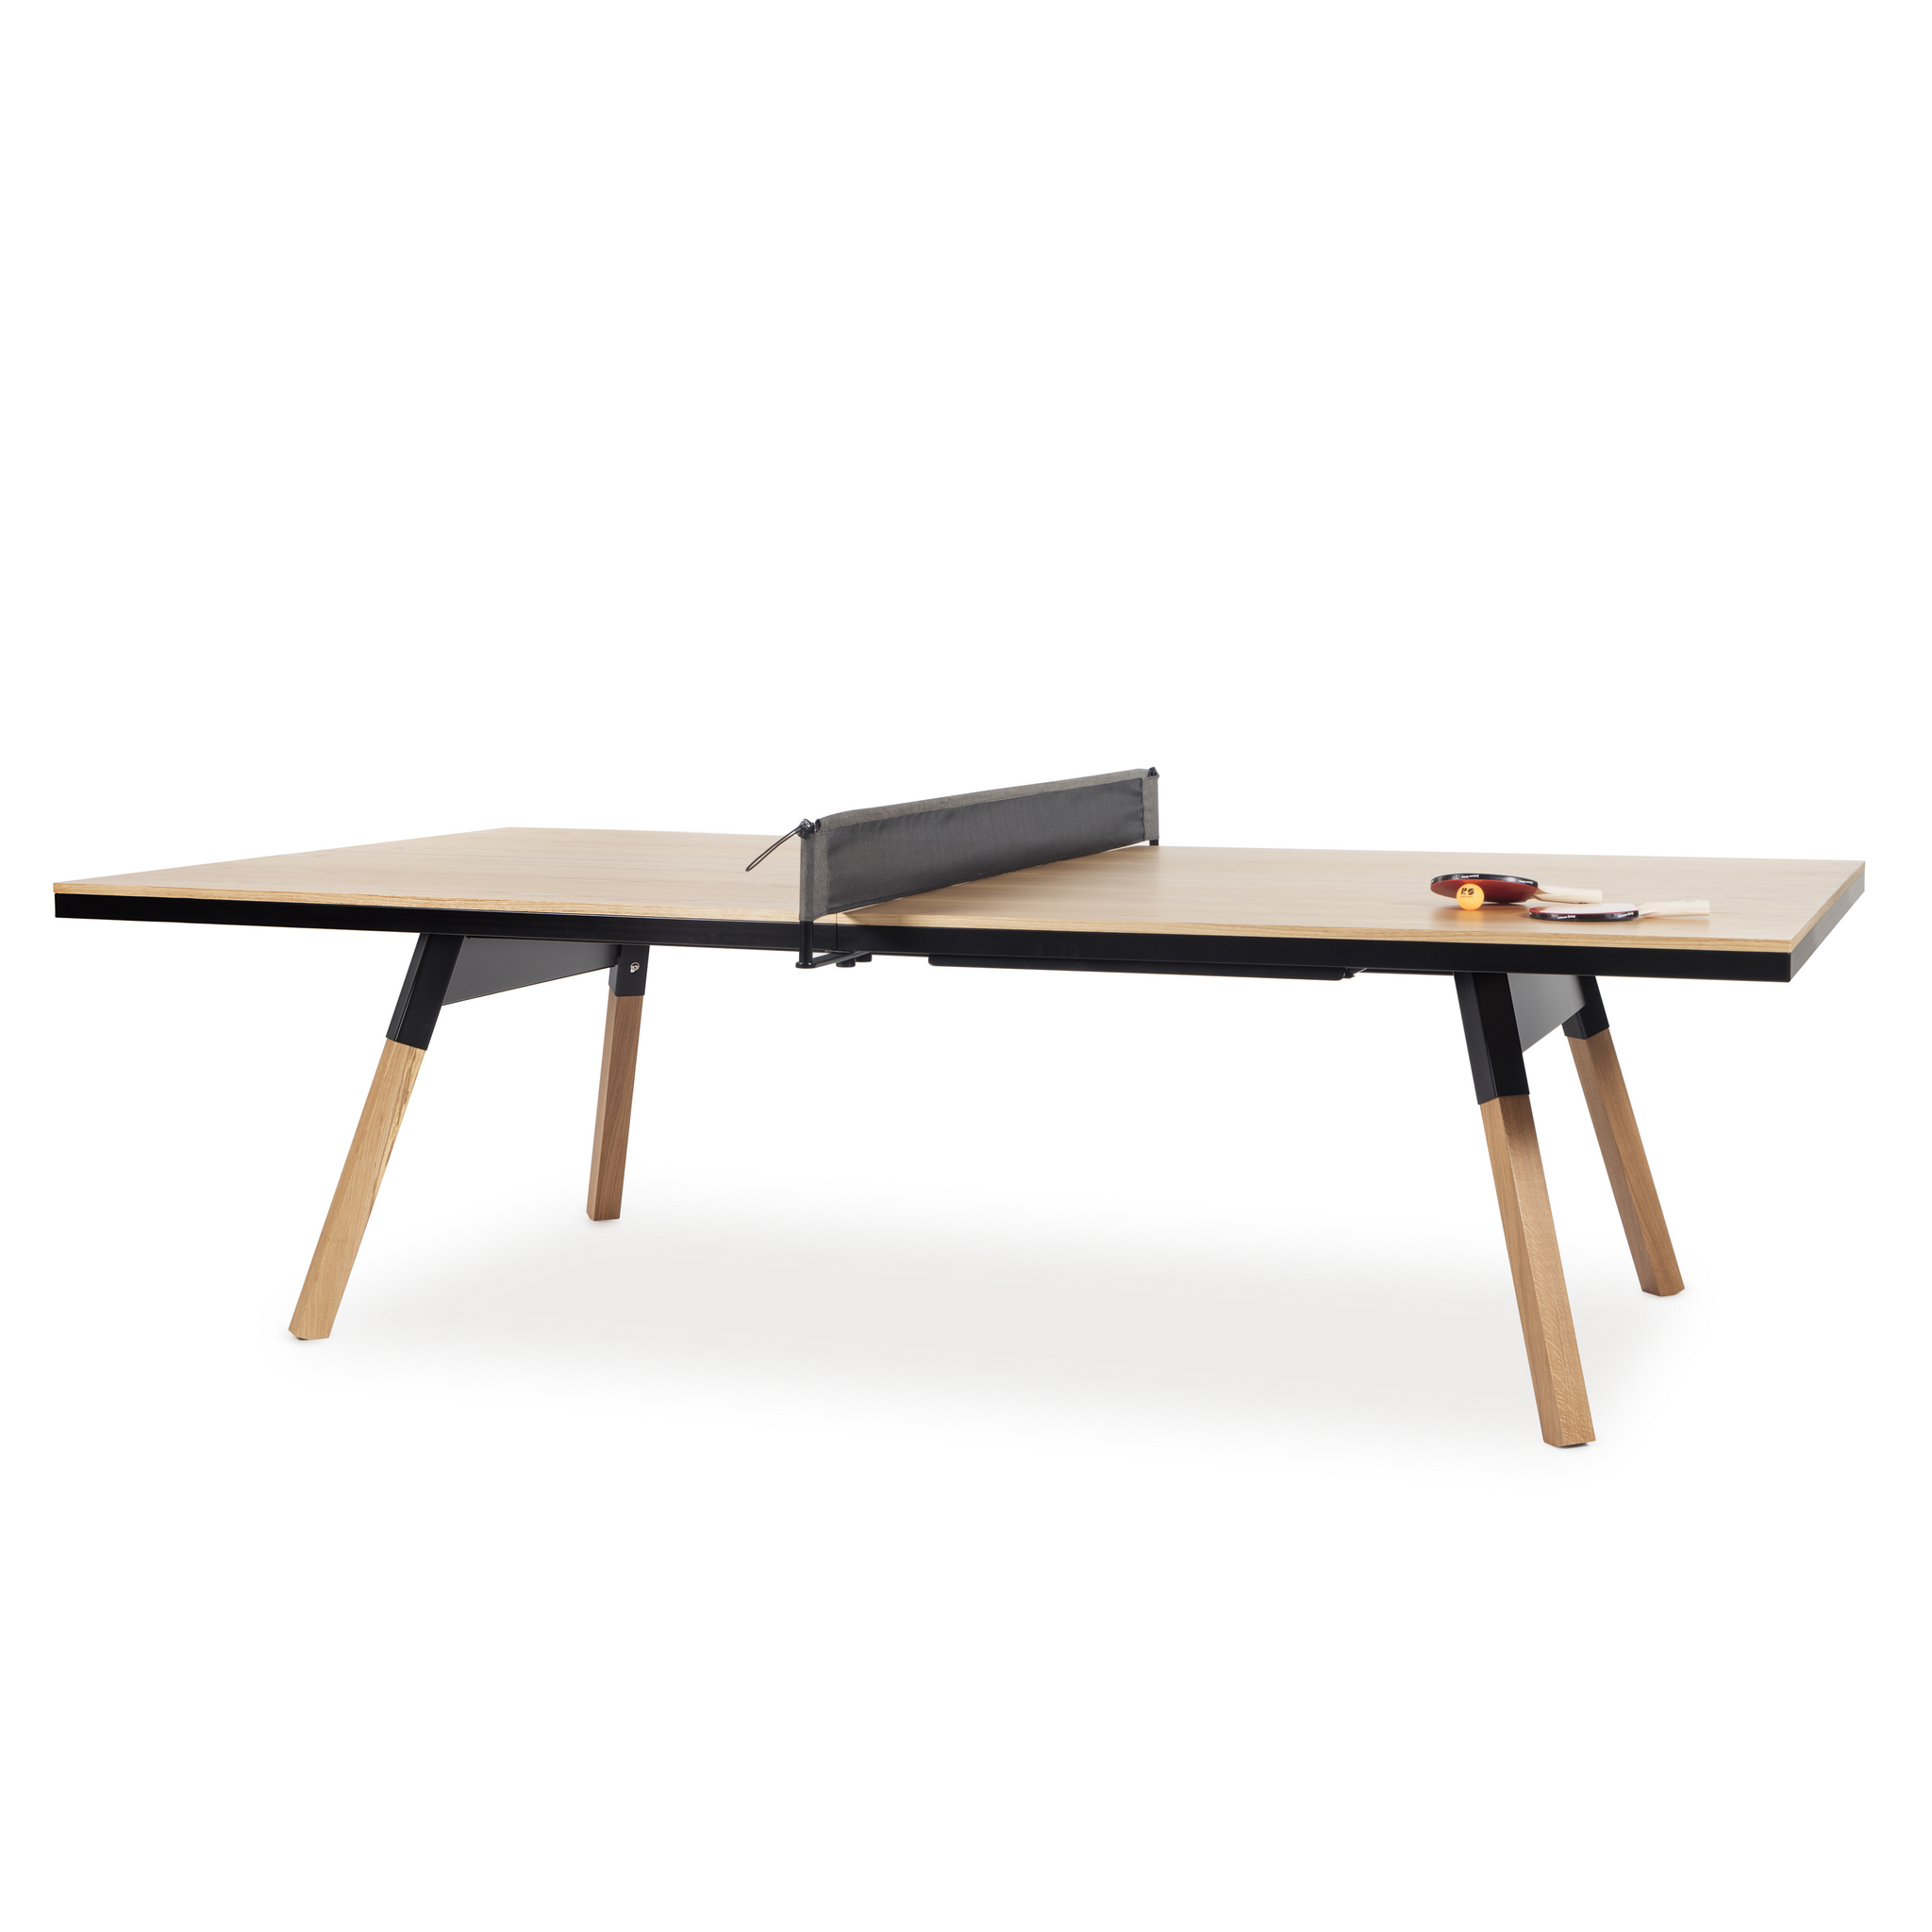 You and Me Tournament Size Table Tennis in Oak & Black